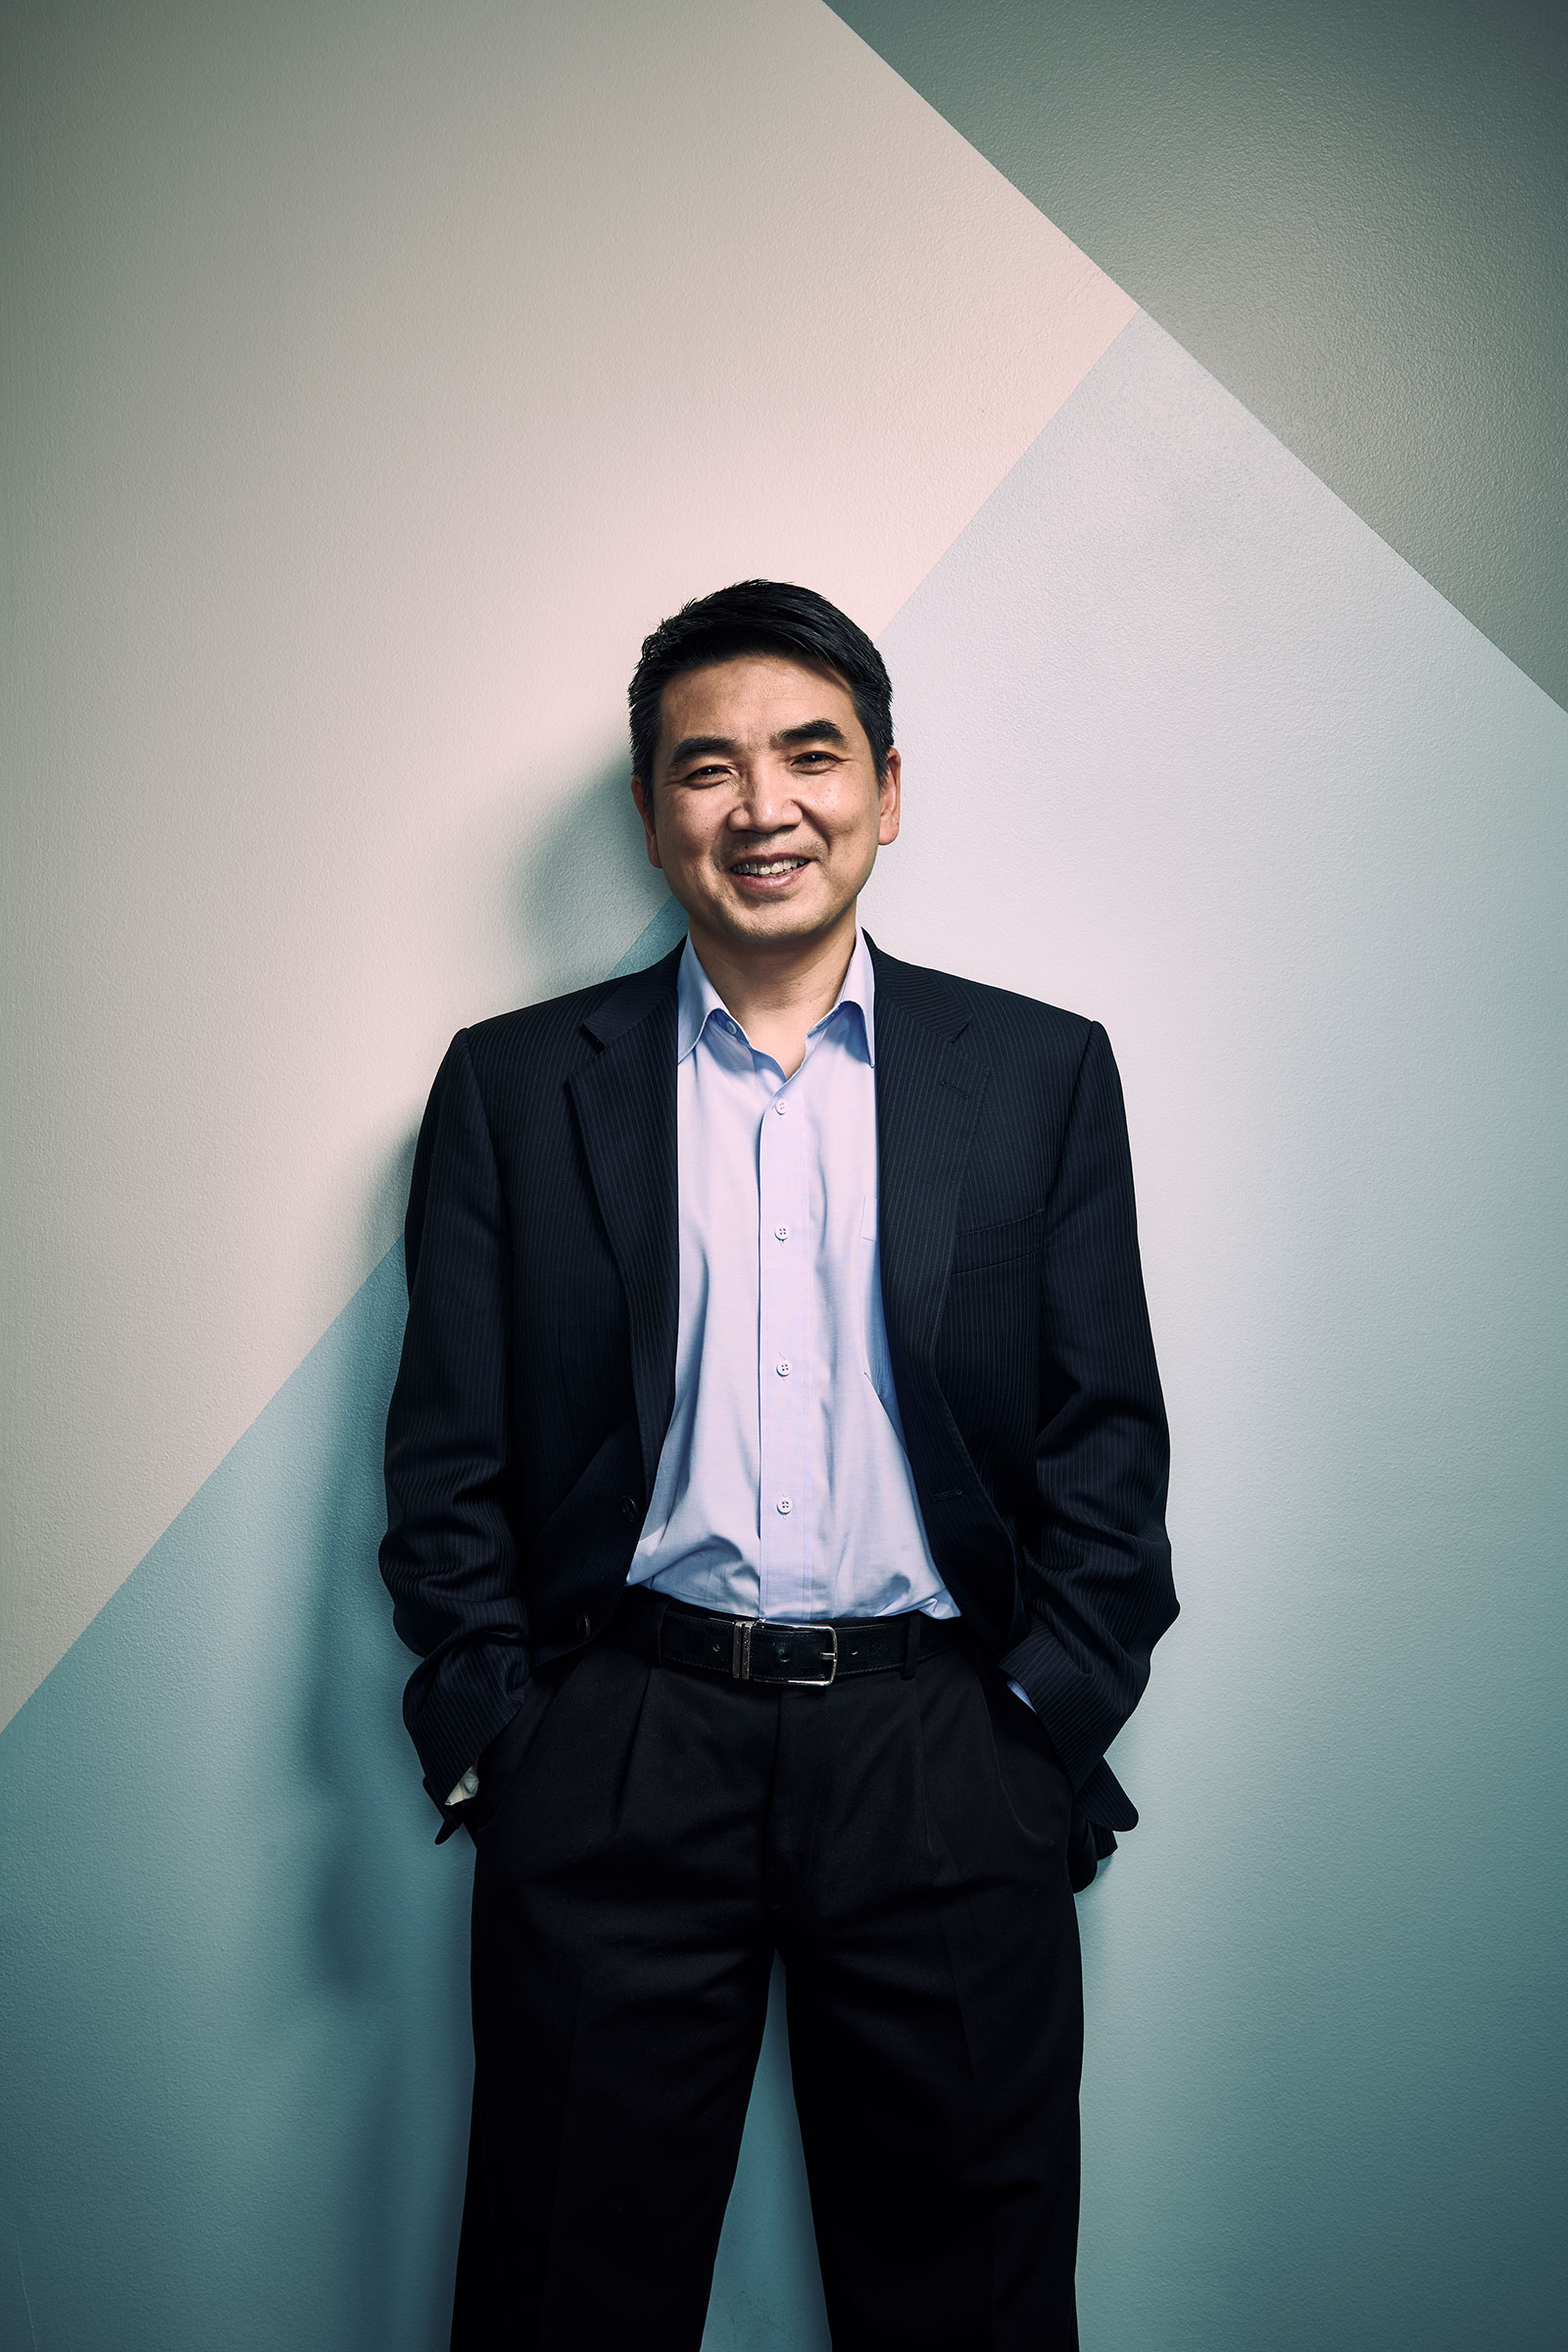 Eric Yuan Is on the 2020 TIME 100 List | TIME